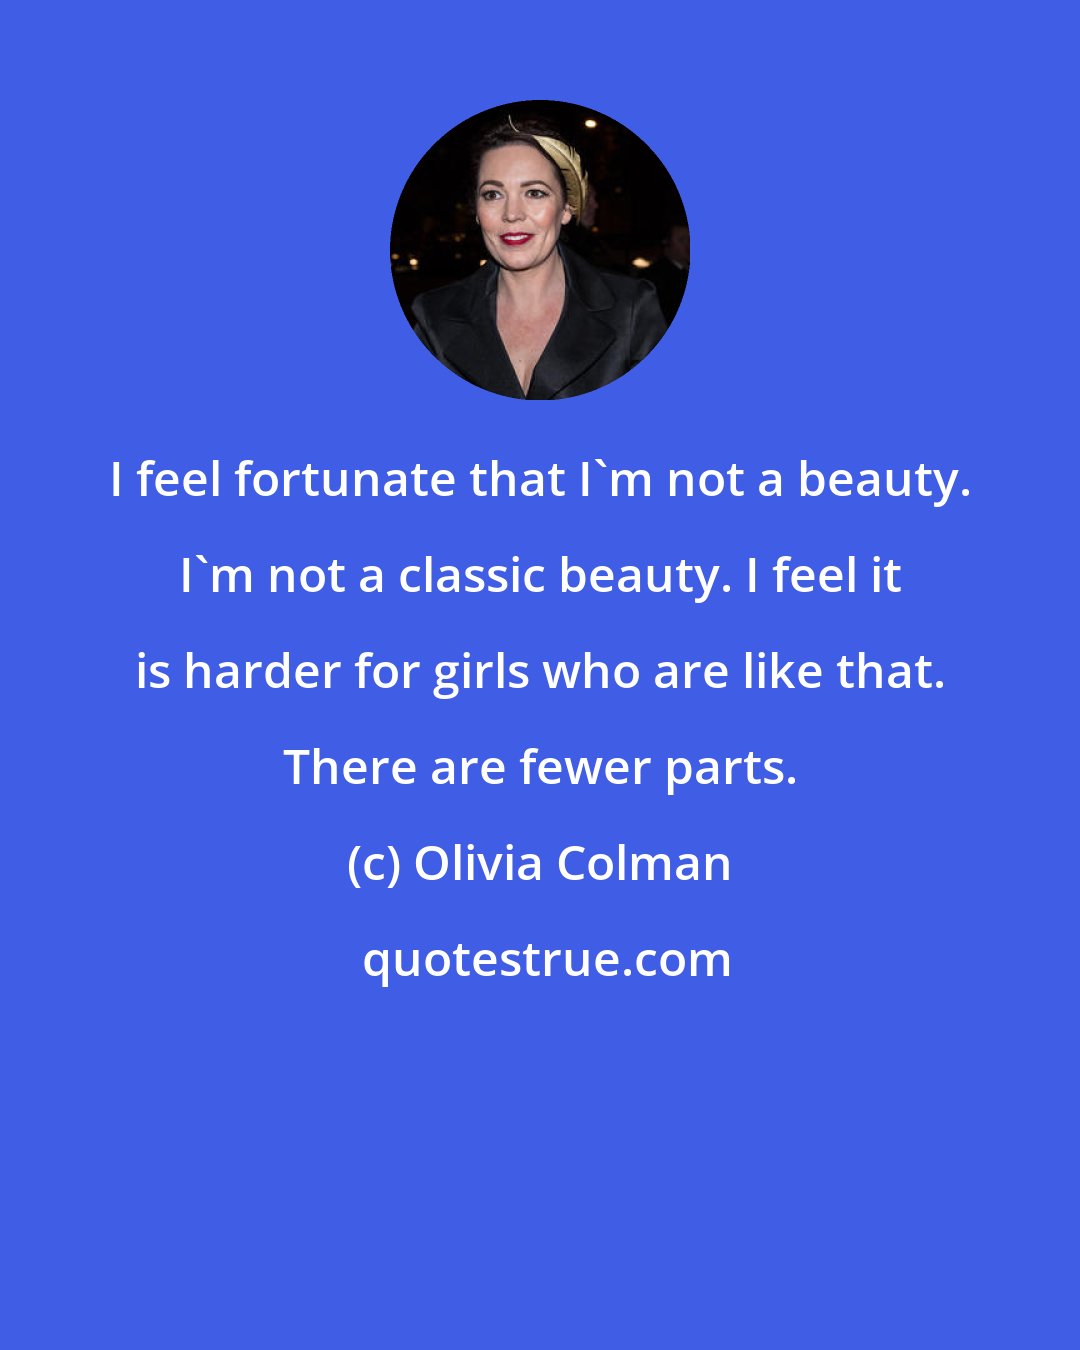 Olivia Colman: I feel fortunate that I'm not a beauty. I'm not a classic beauty. I feel it is harder for girls who are like that. There are fewer parts.